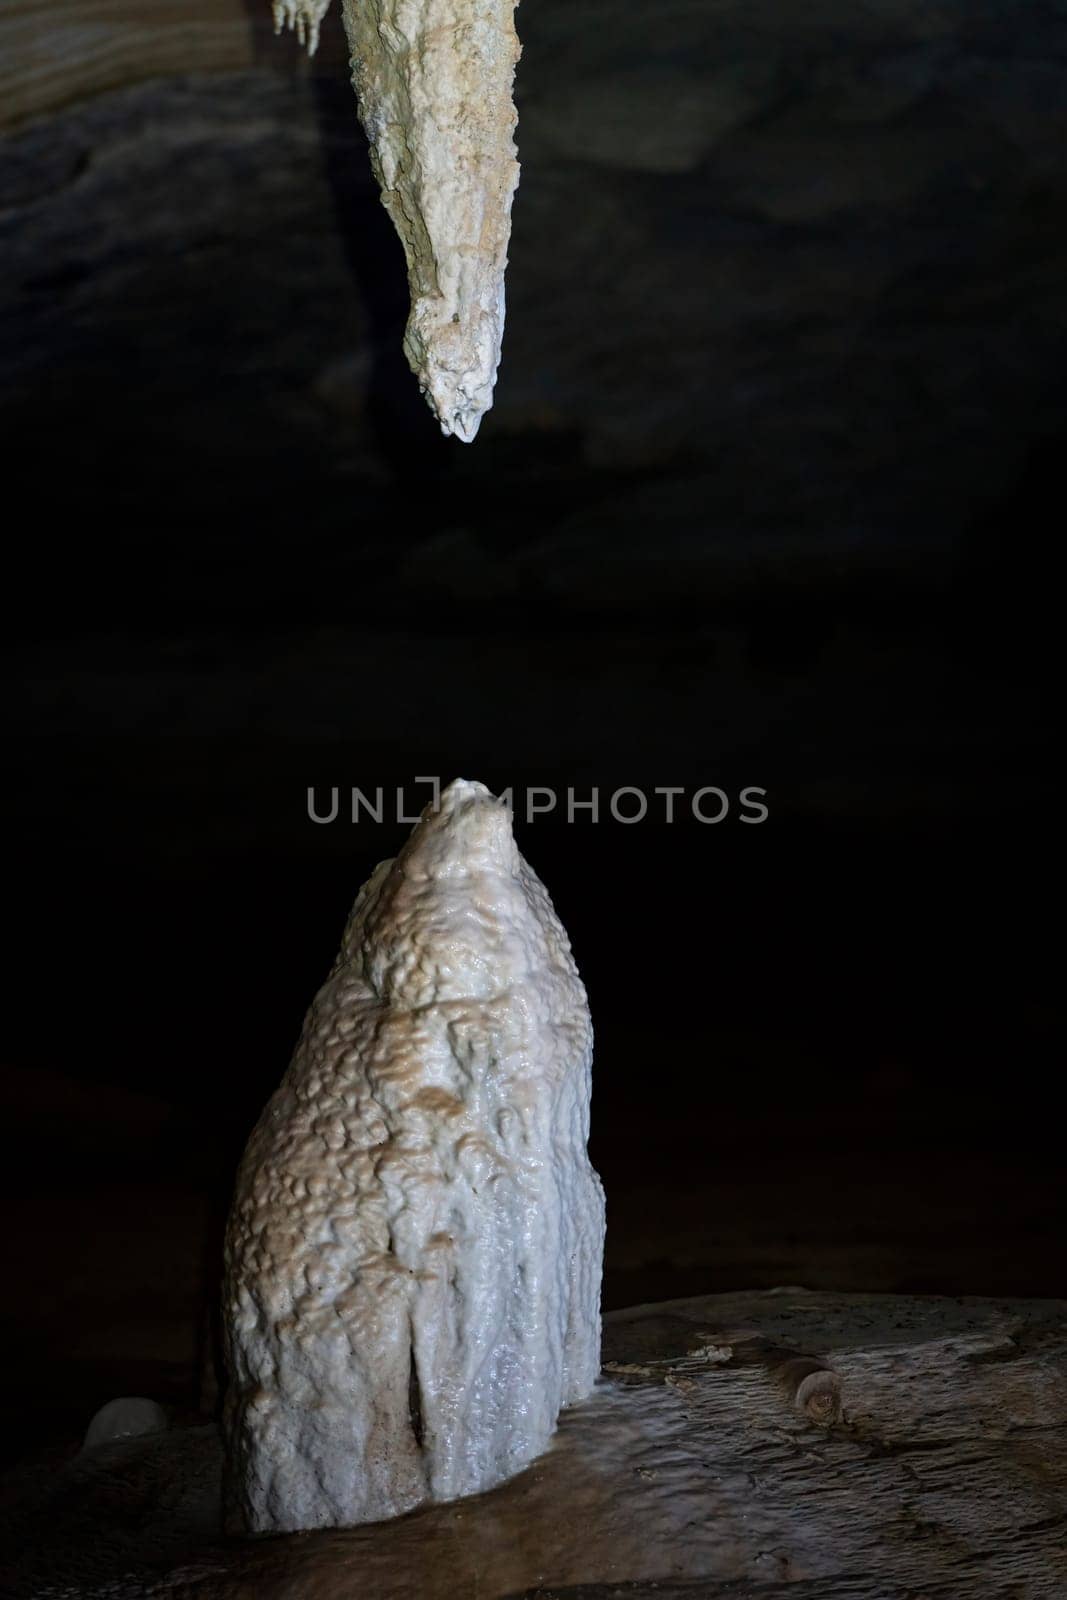 A photo shows a stalactite and stalagmite nearing union in the quiet of a cave.